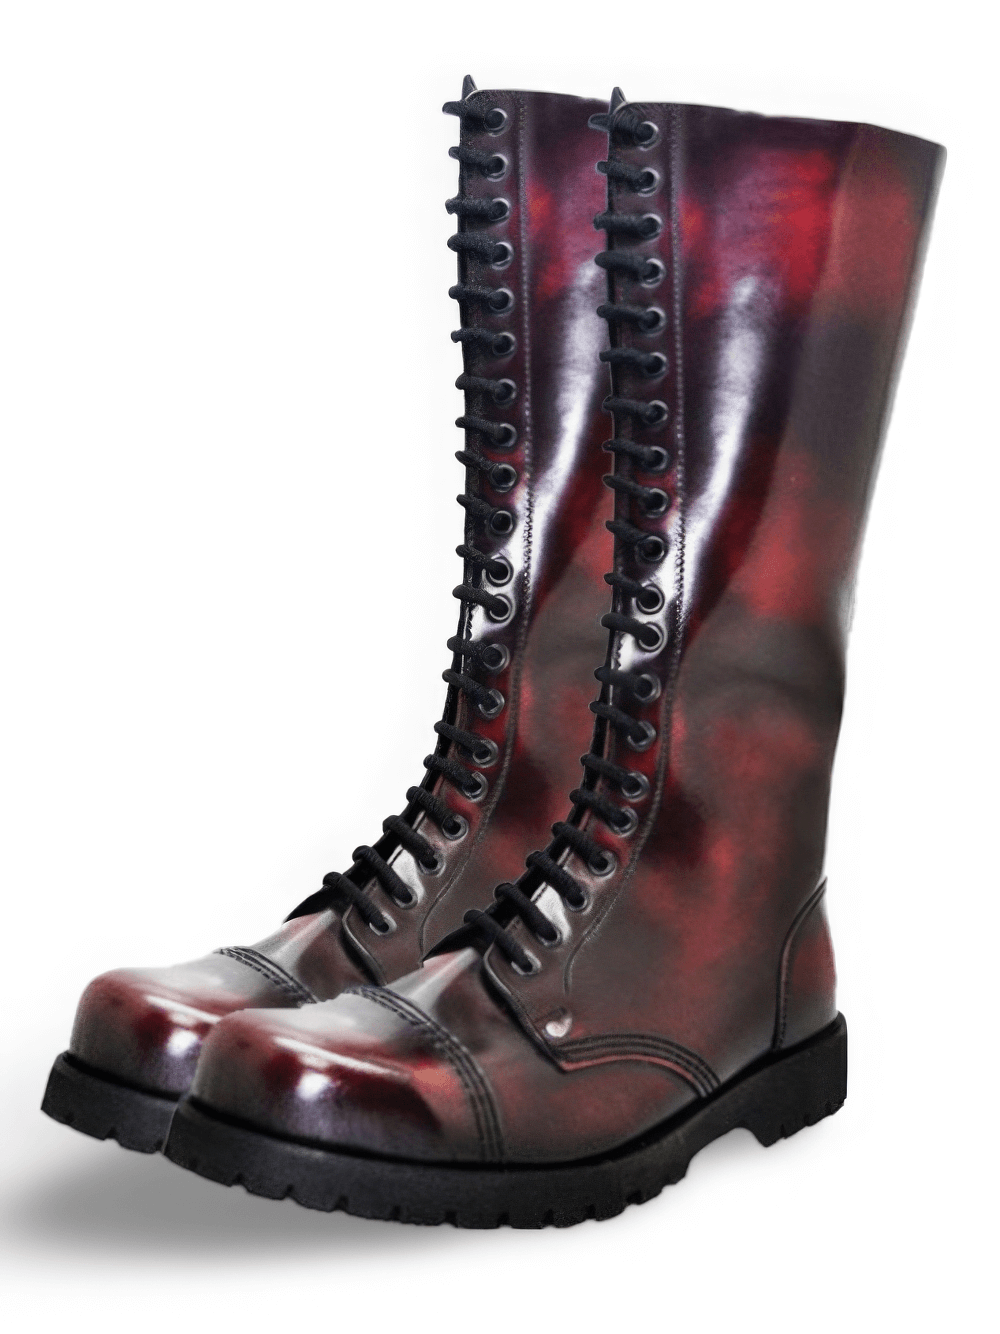 Wine Red 20 Eyelets Unisex Rangers Boots with Steel Toe